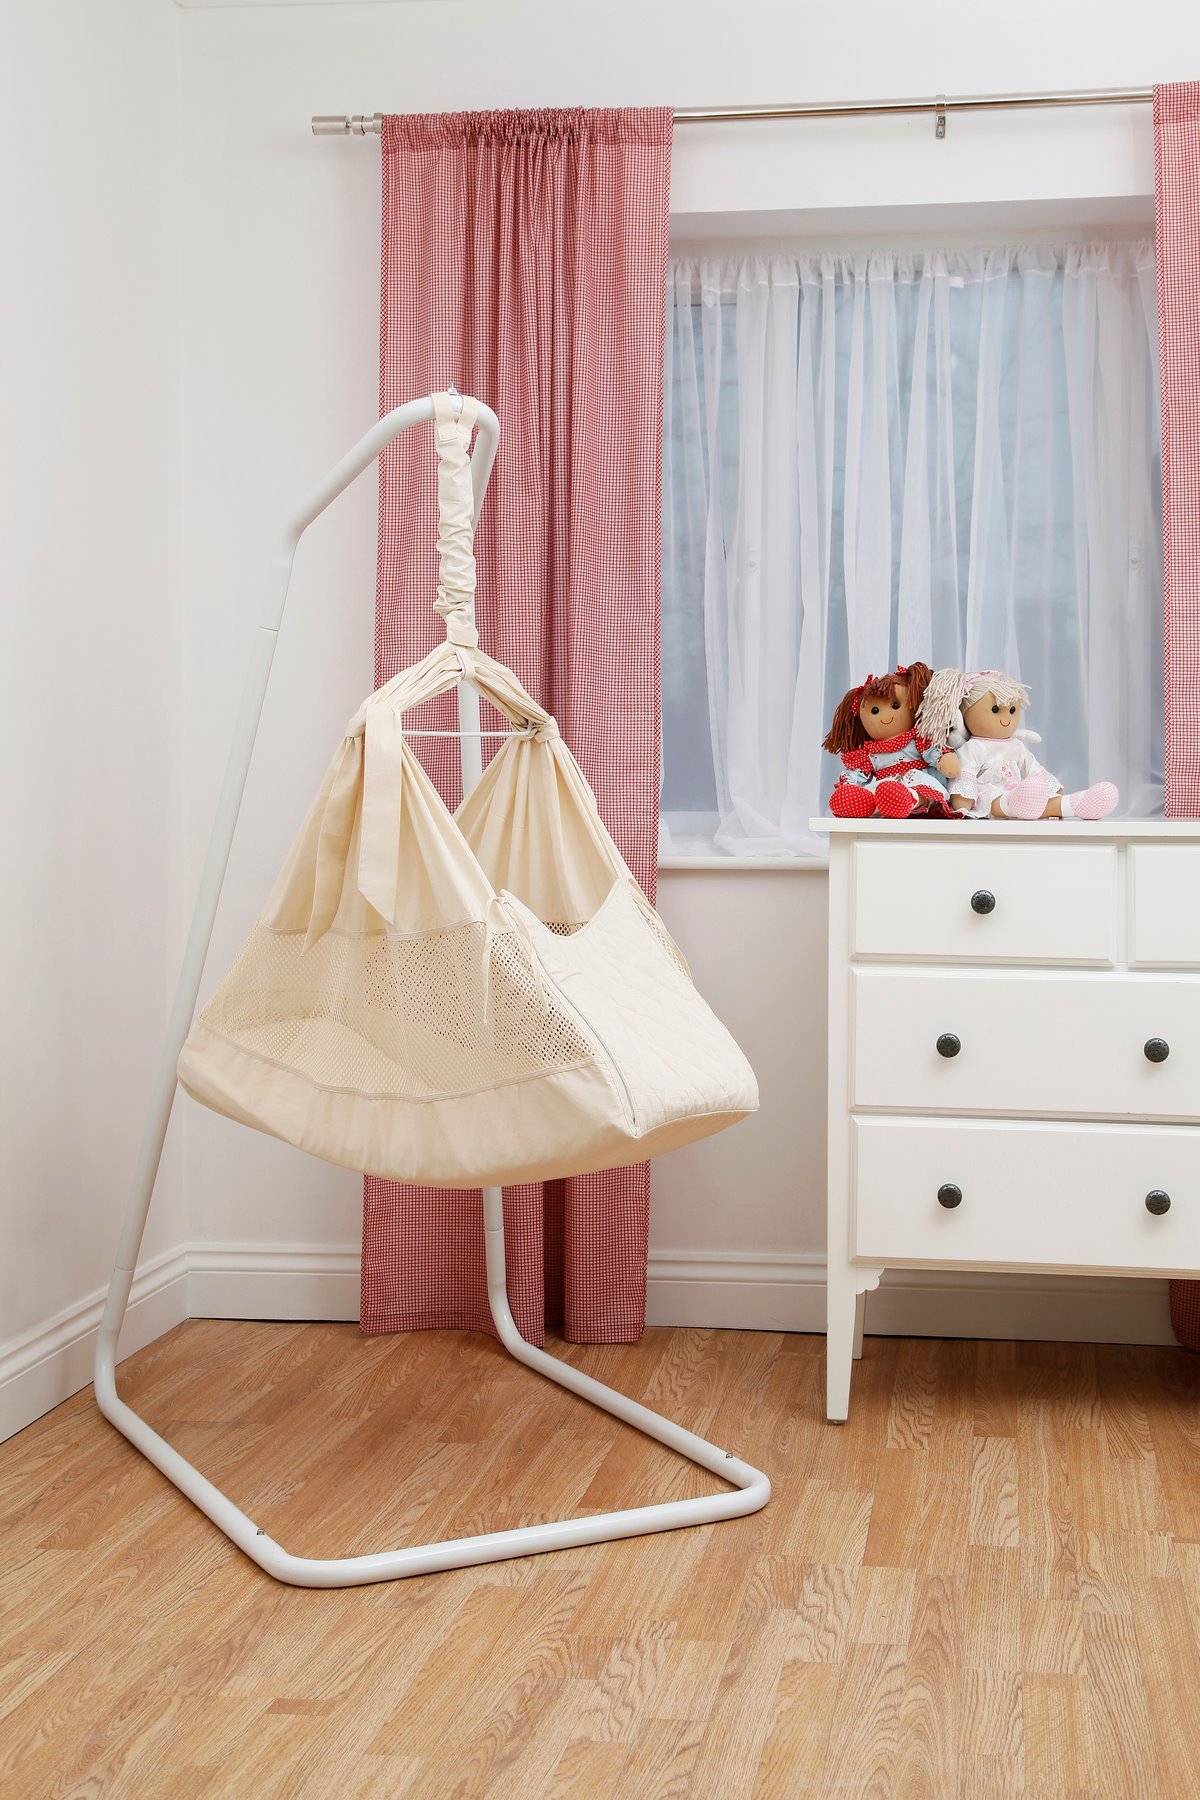 What baby wouldn’t love the rhythmic movement and snug tactile environment of a baby hammock?